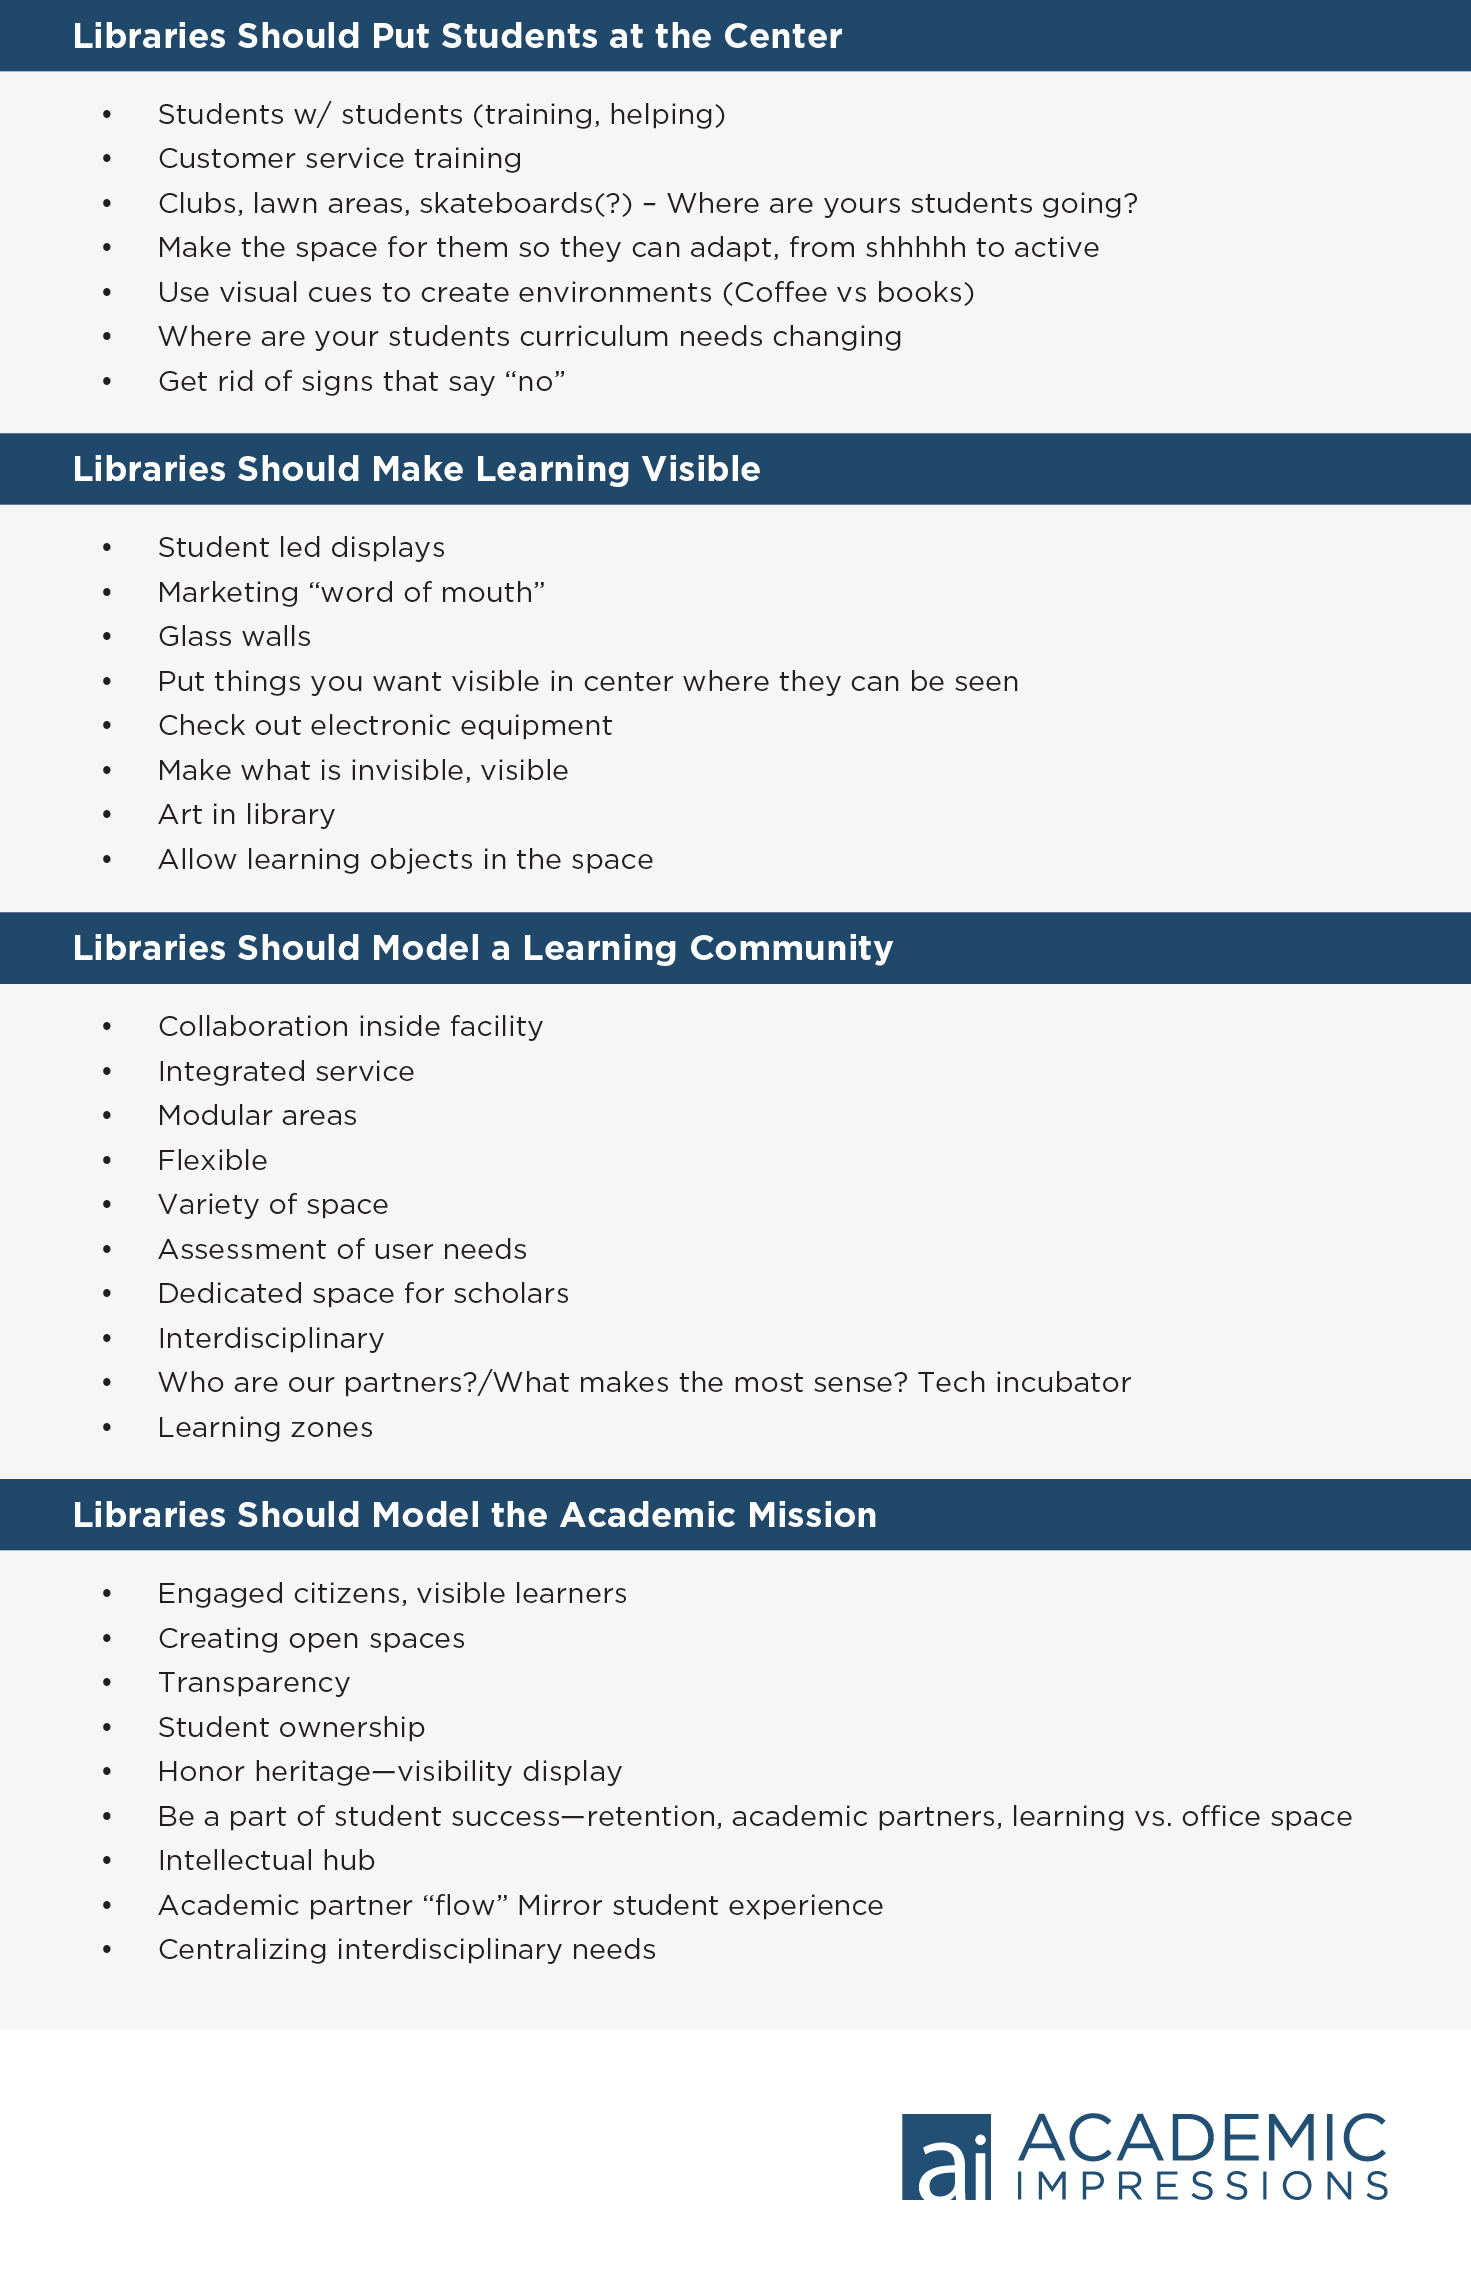 Infographic: Most critical elements to include in a modern library